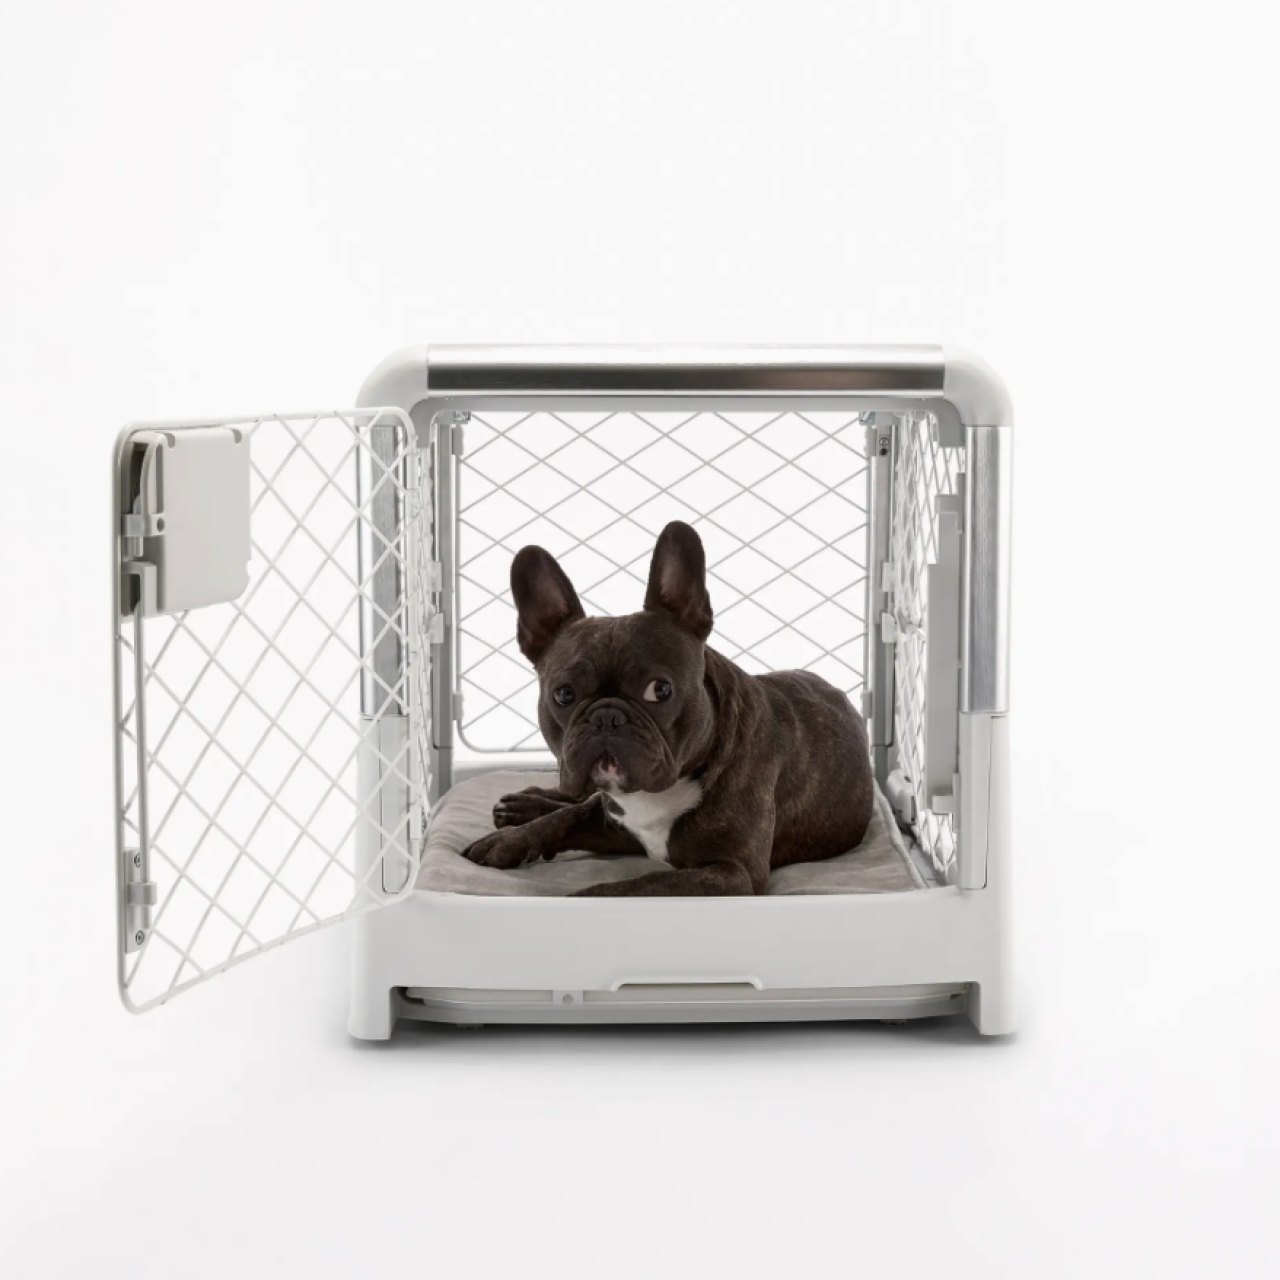 https://hgtvhome.sndimg.com/content/dam/images/hgtv/products/2023/5/26/RX_Revol_Dog-Crate.png.rend.hgtvcom.1280.1280.suffix/1685113133290.png